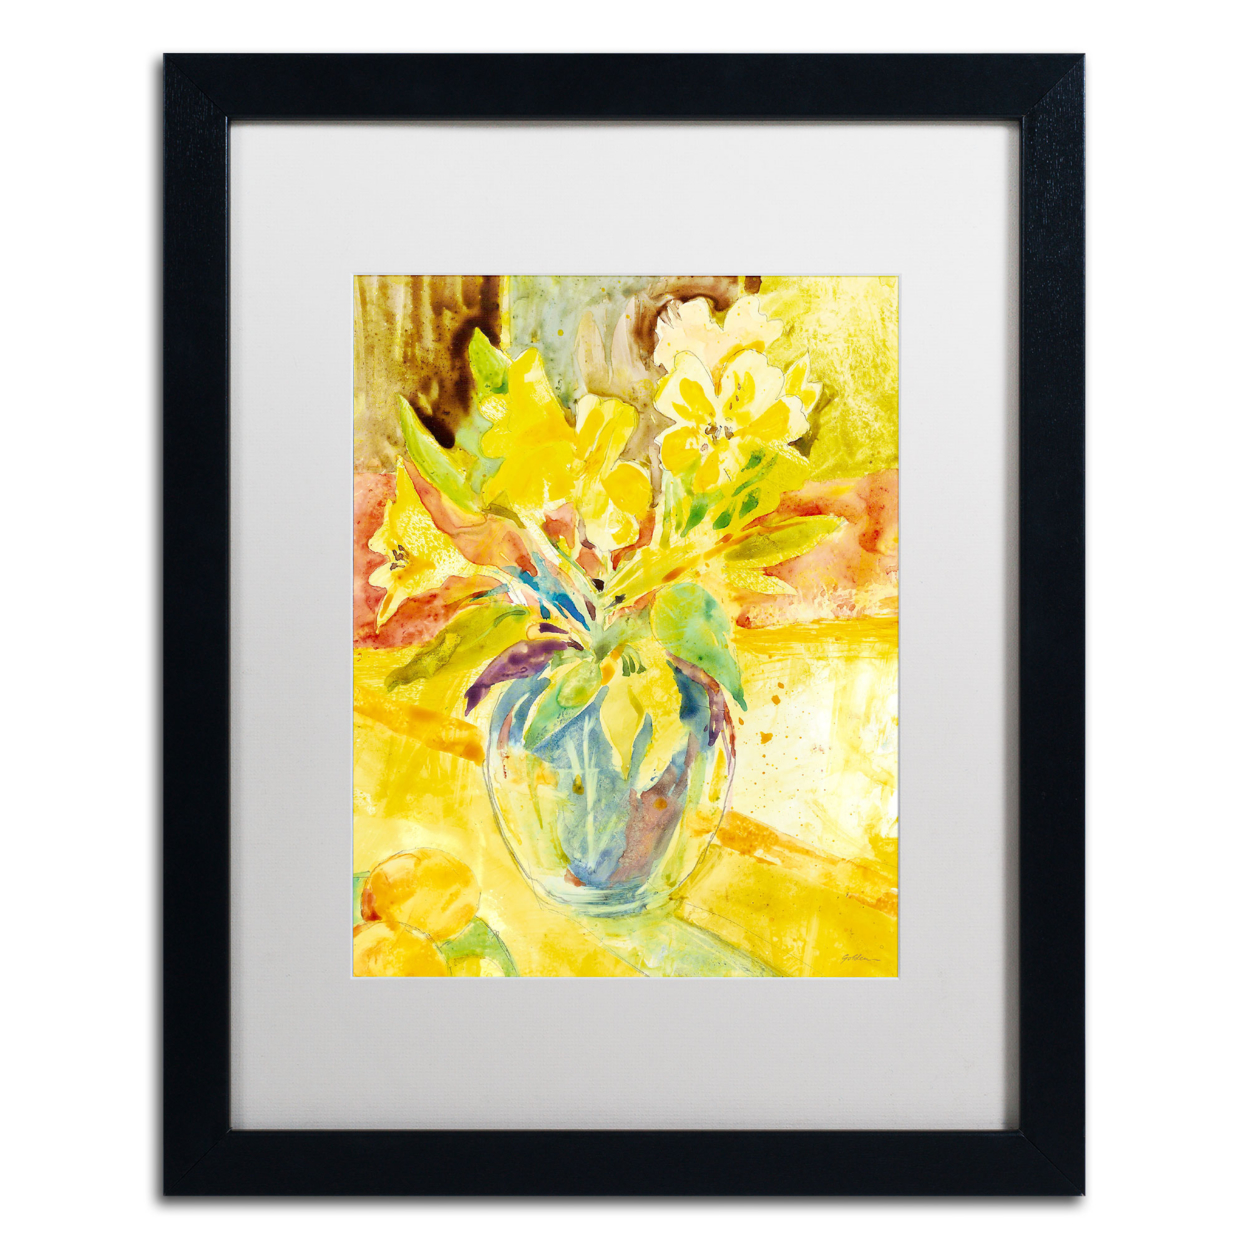 Sheila Golden 'Vase With Yellow Flowers' Black Wooden Framed Art 18 X 22 Inches